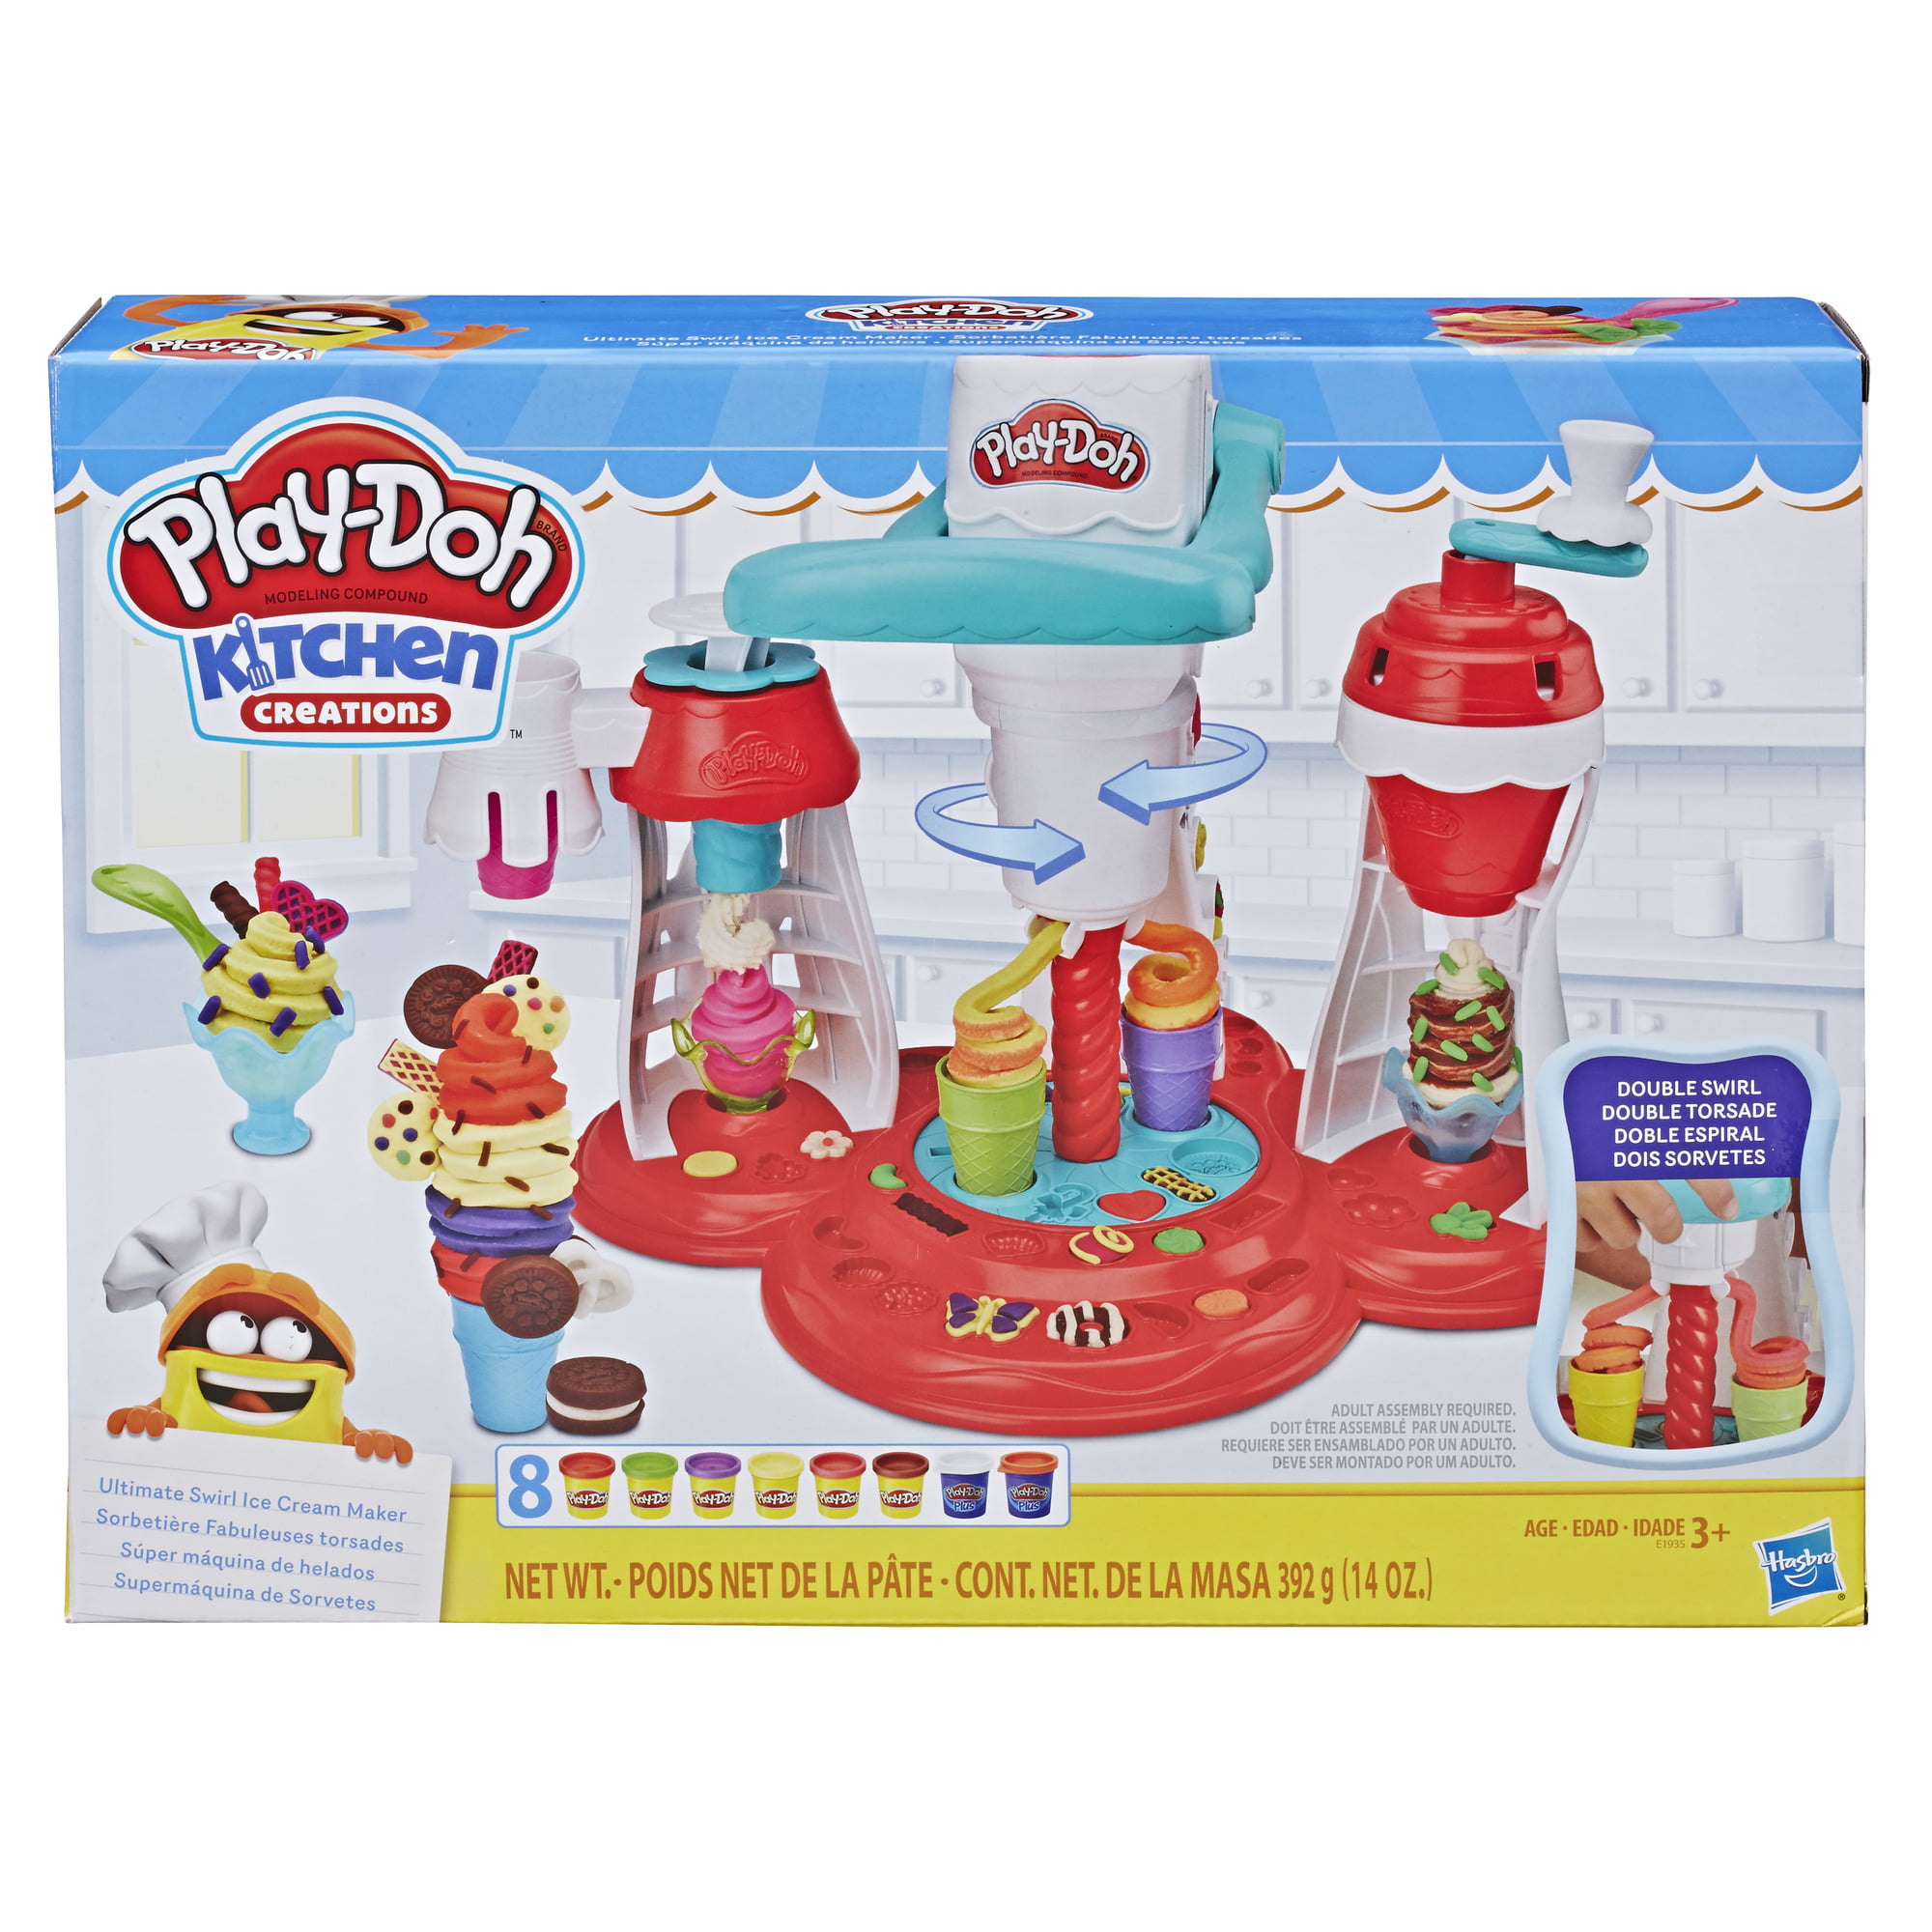 Play-Doh Kitchen Creations Ultimate 